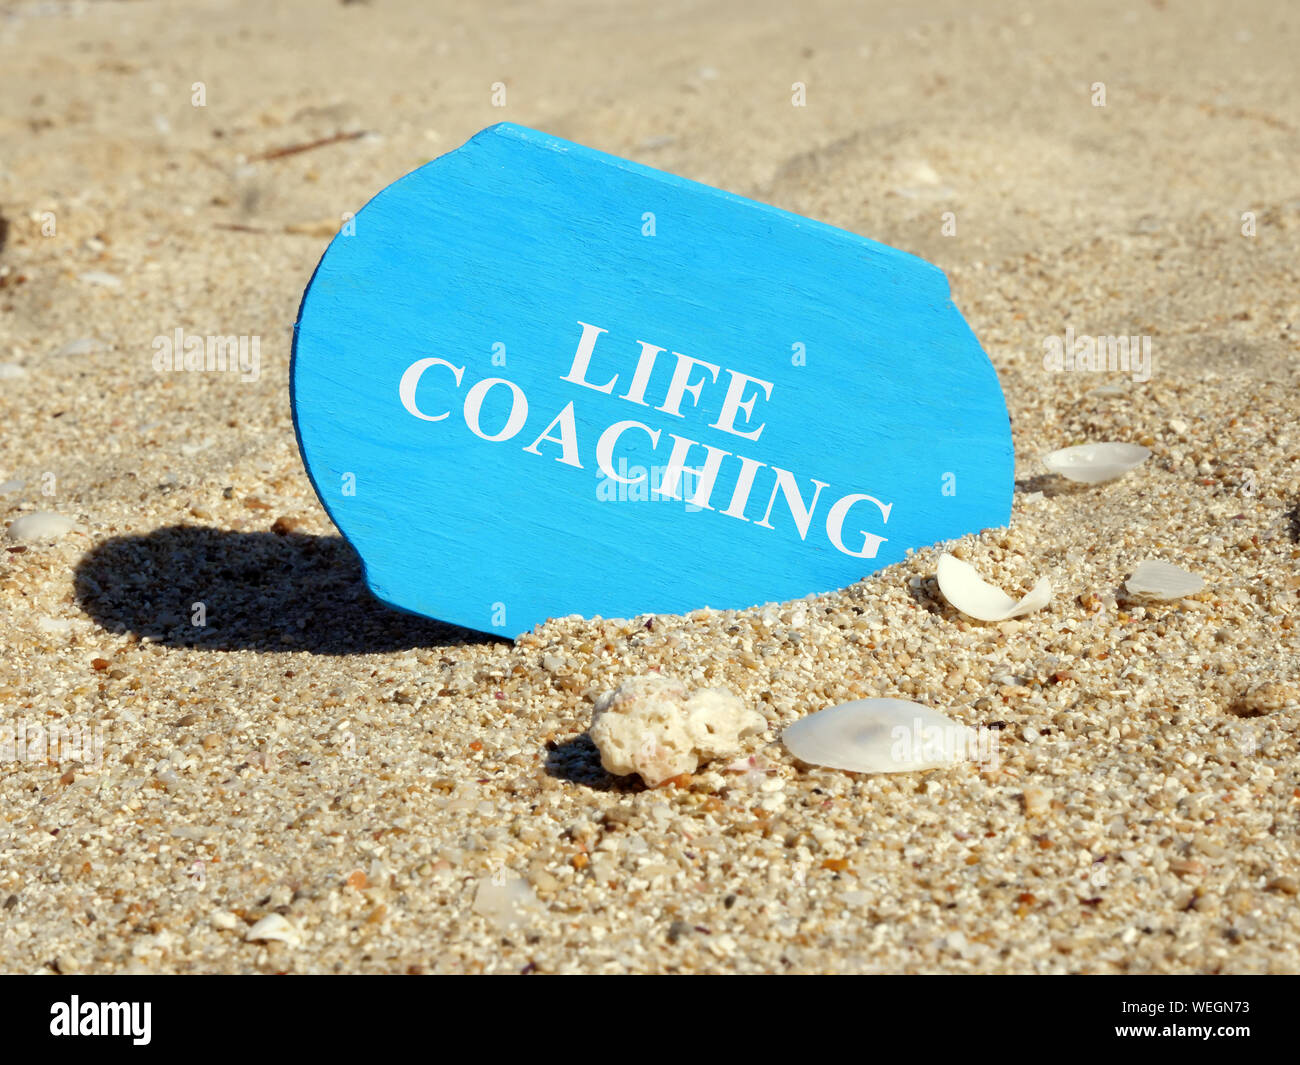 Life coaching sign on a plank in sand. Stock Photo